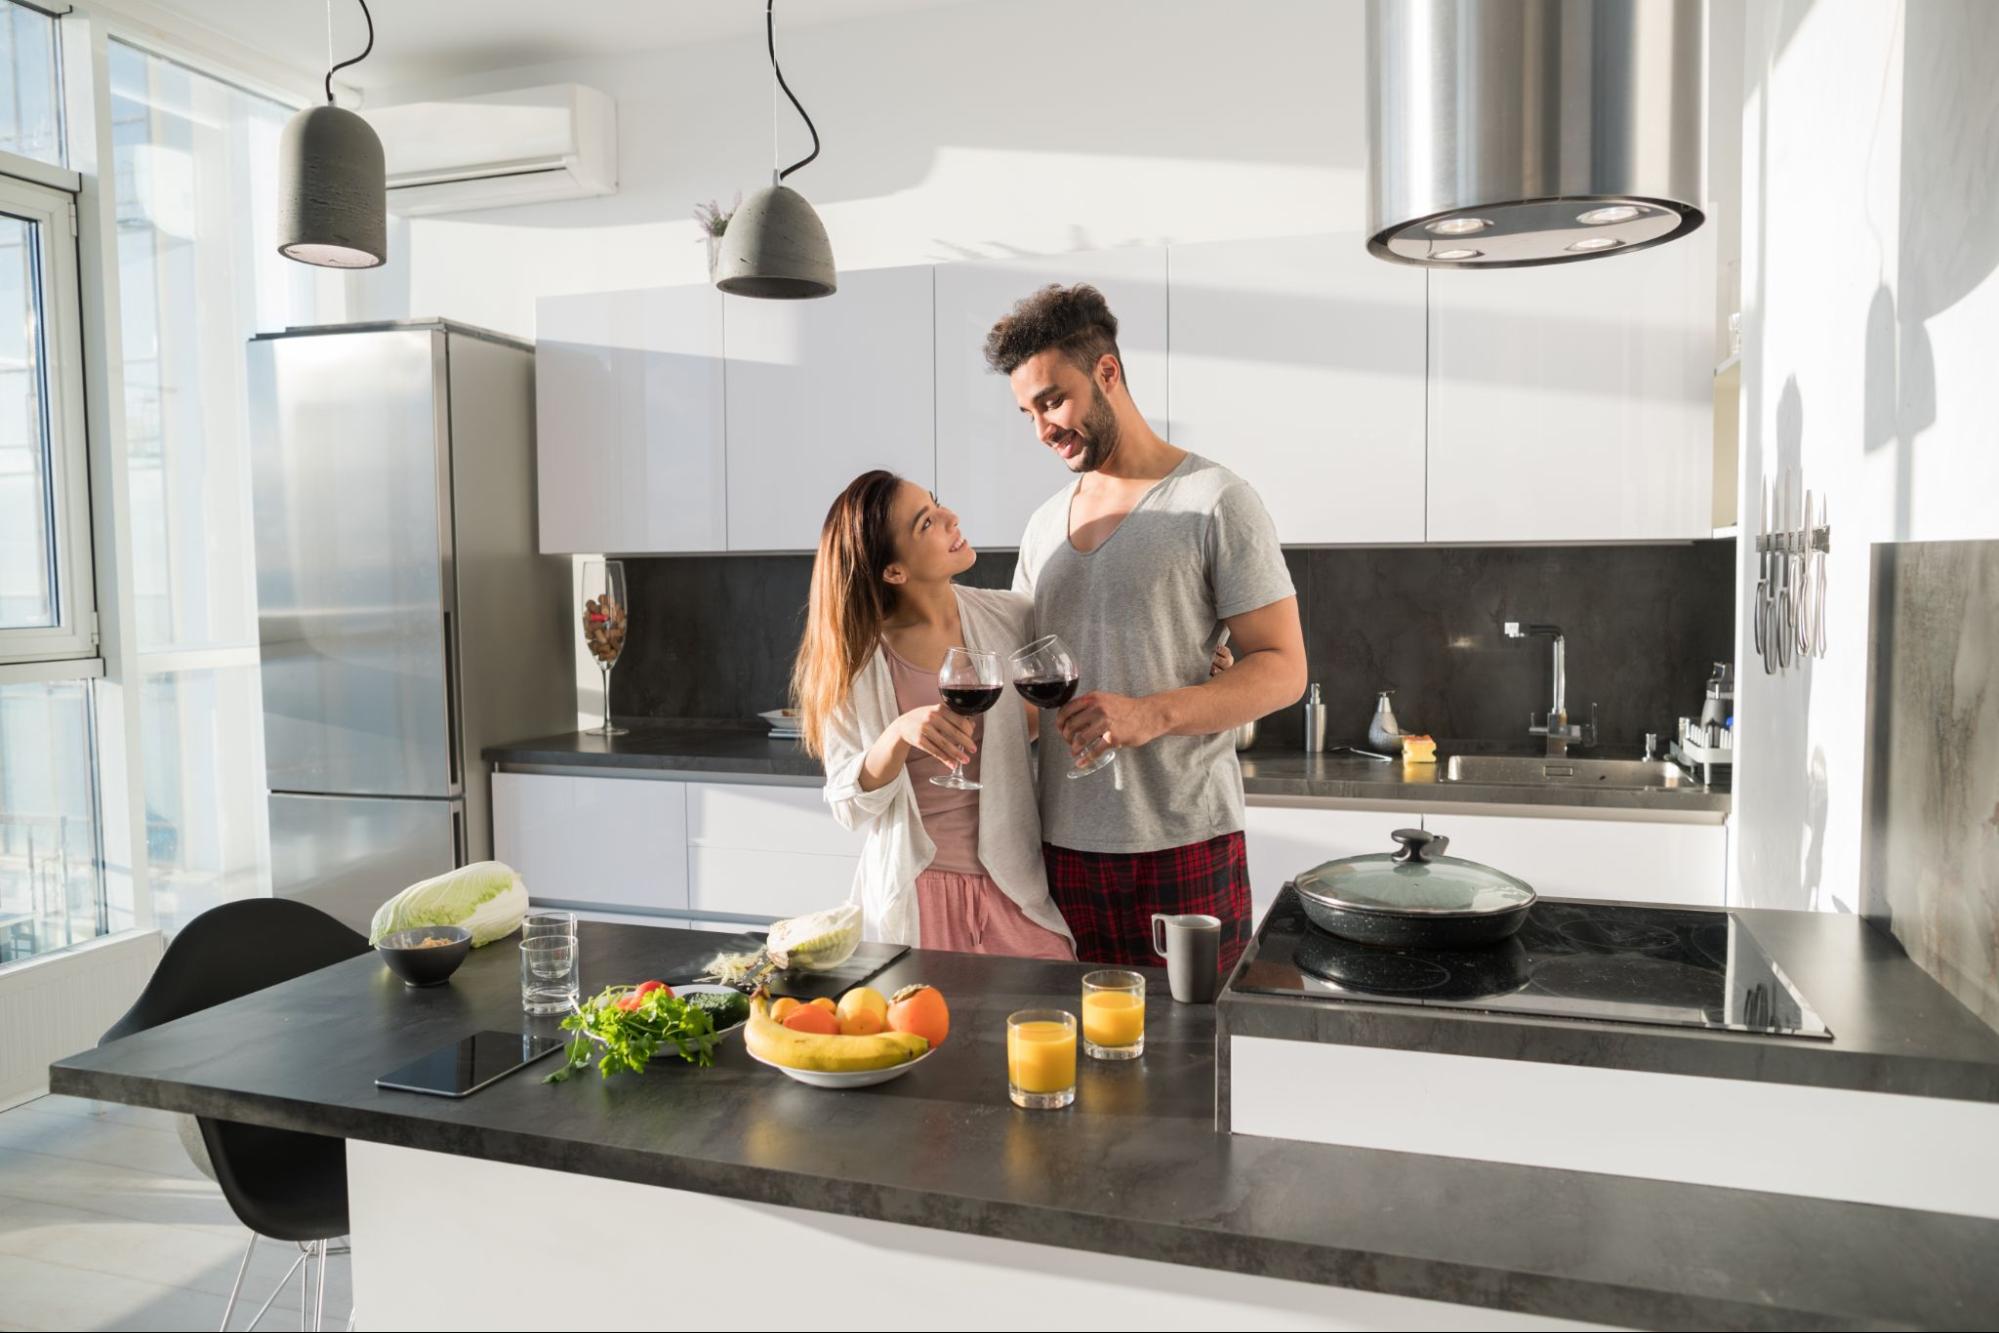 A young couple using kitchen appliances in a modern kitchen.